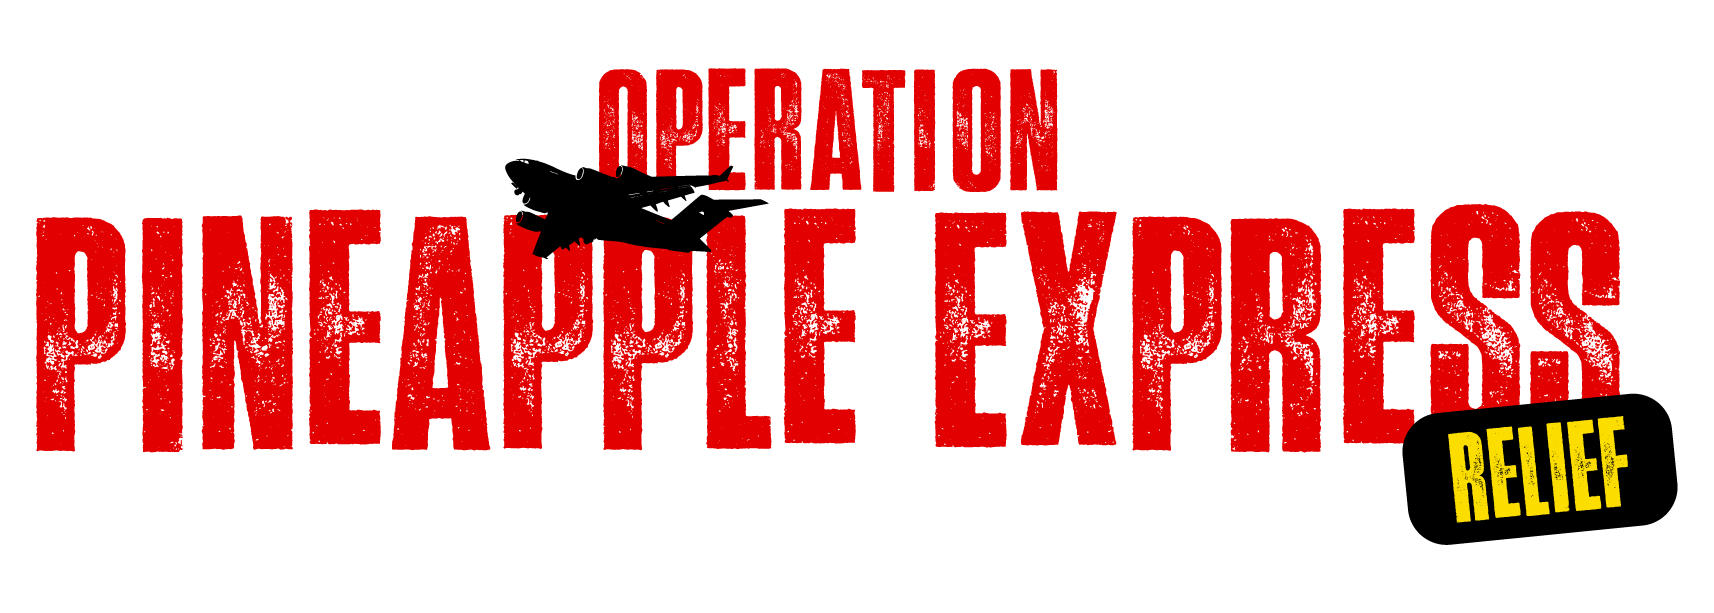 Operation Pineapple Express Relief